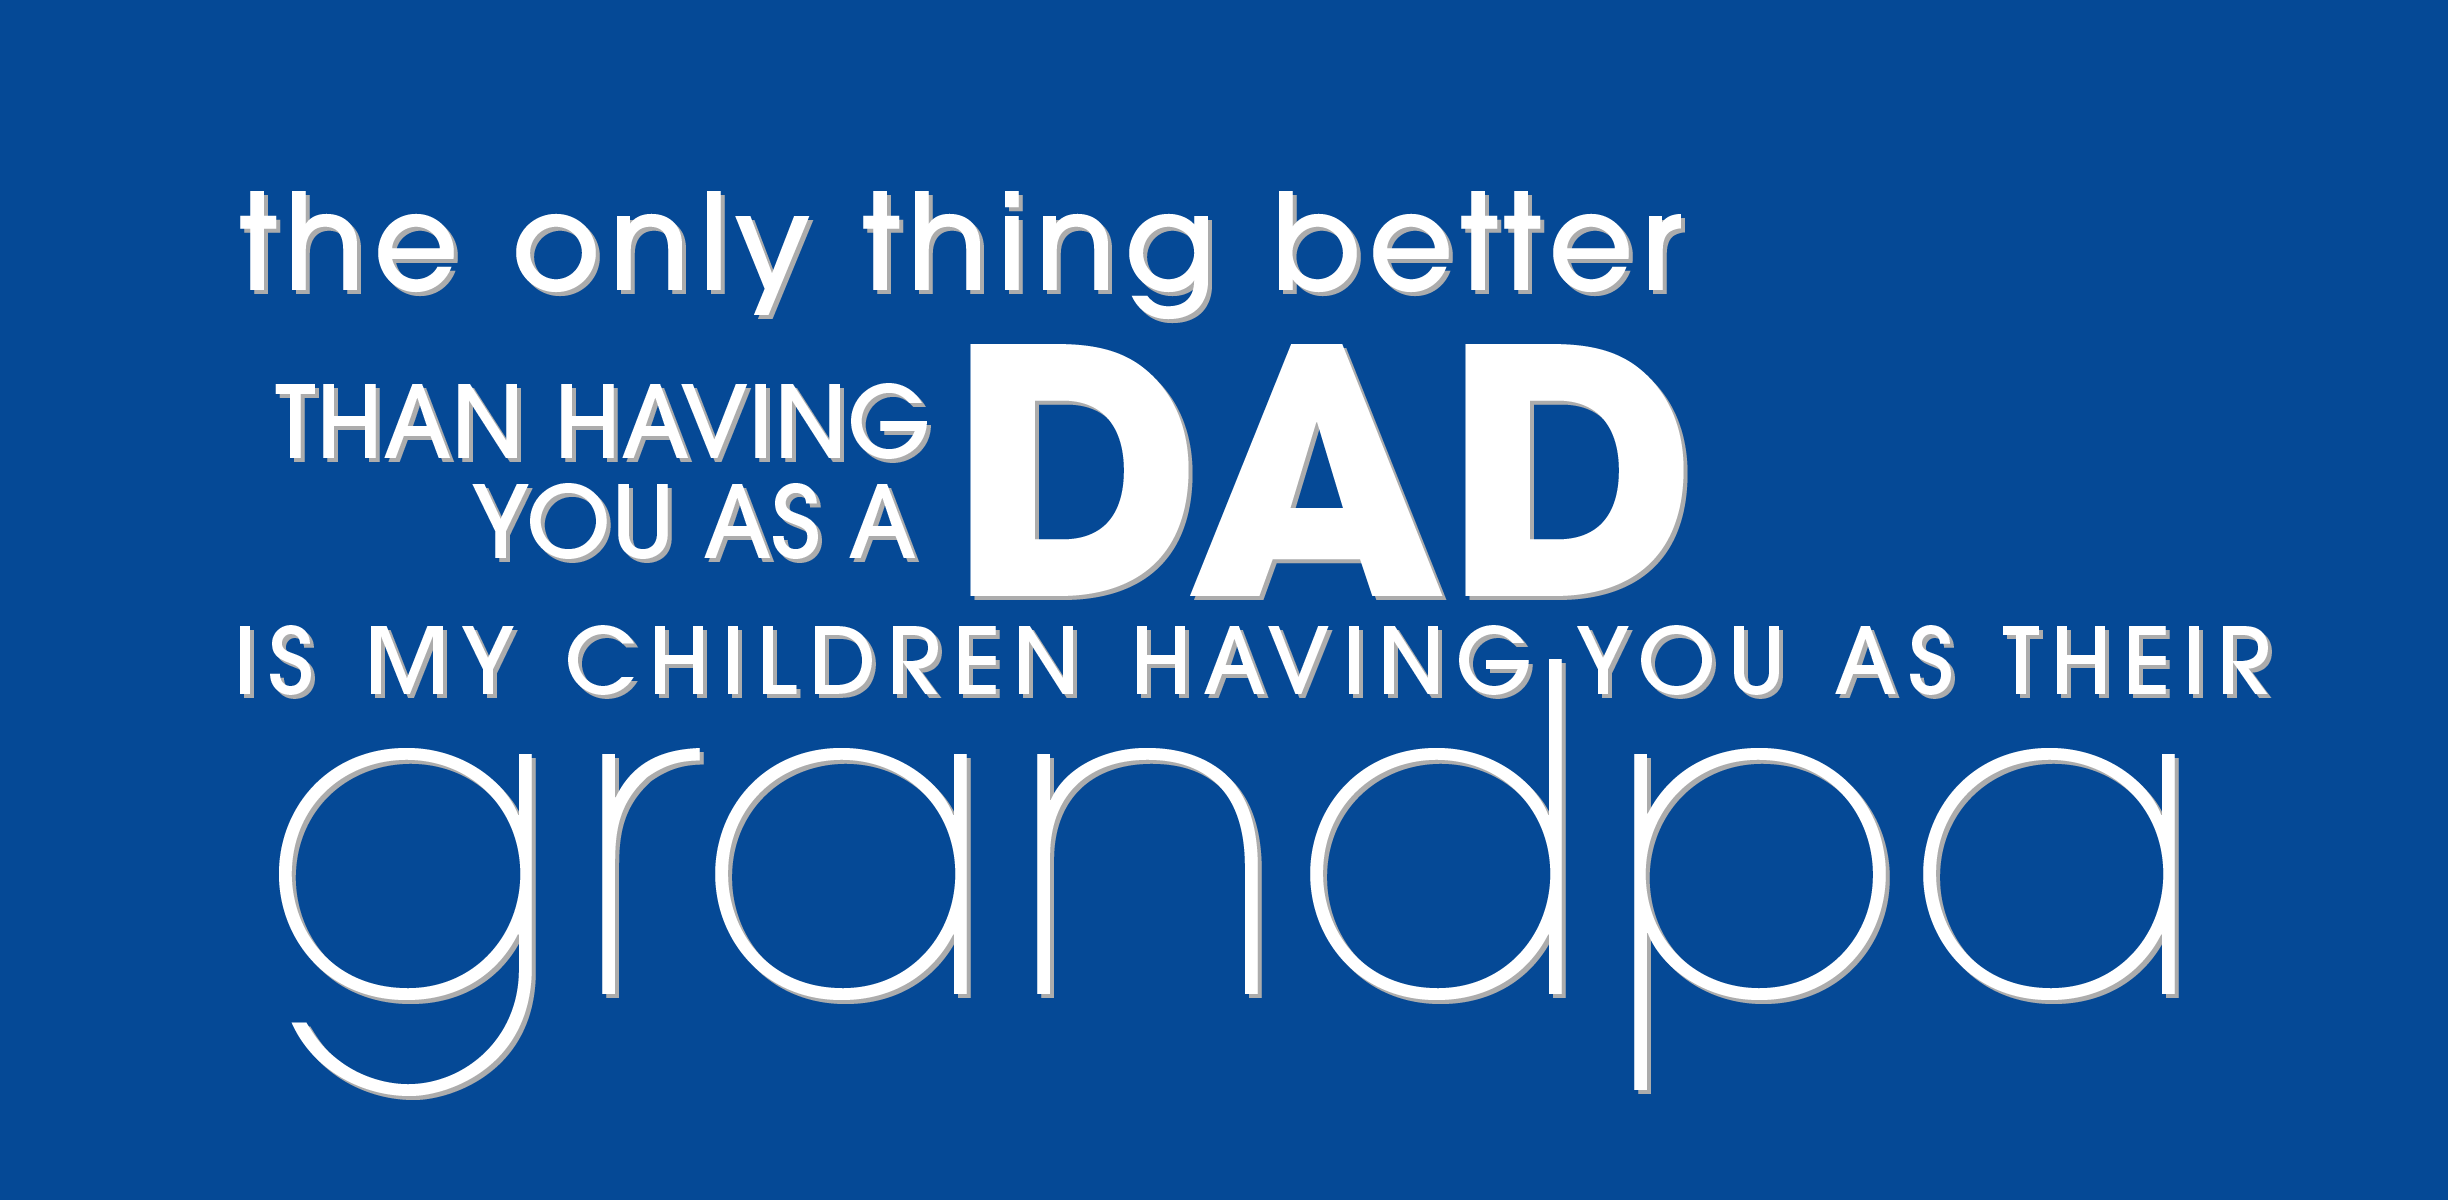 FATHER QUOTES image quotes at hippoquotes.com